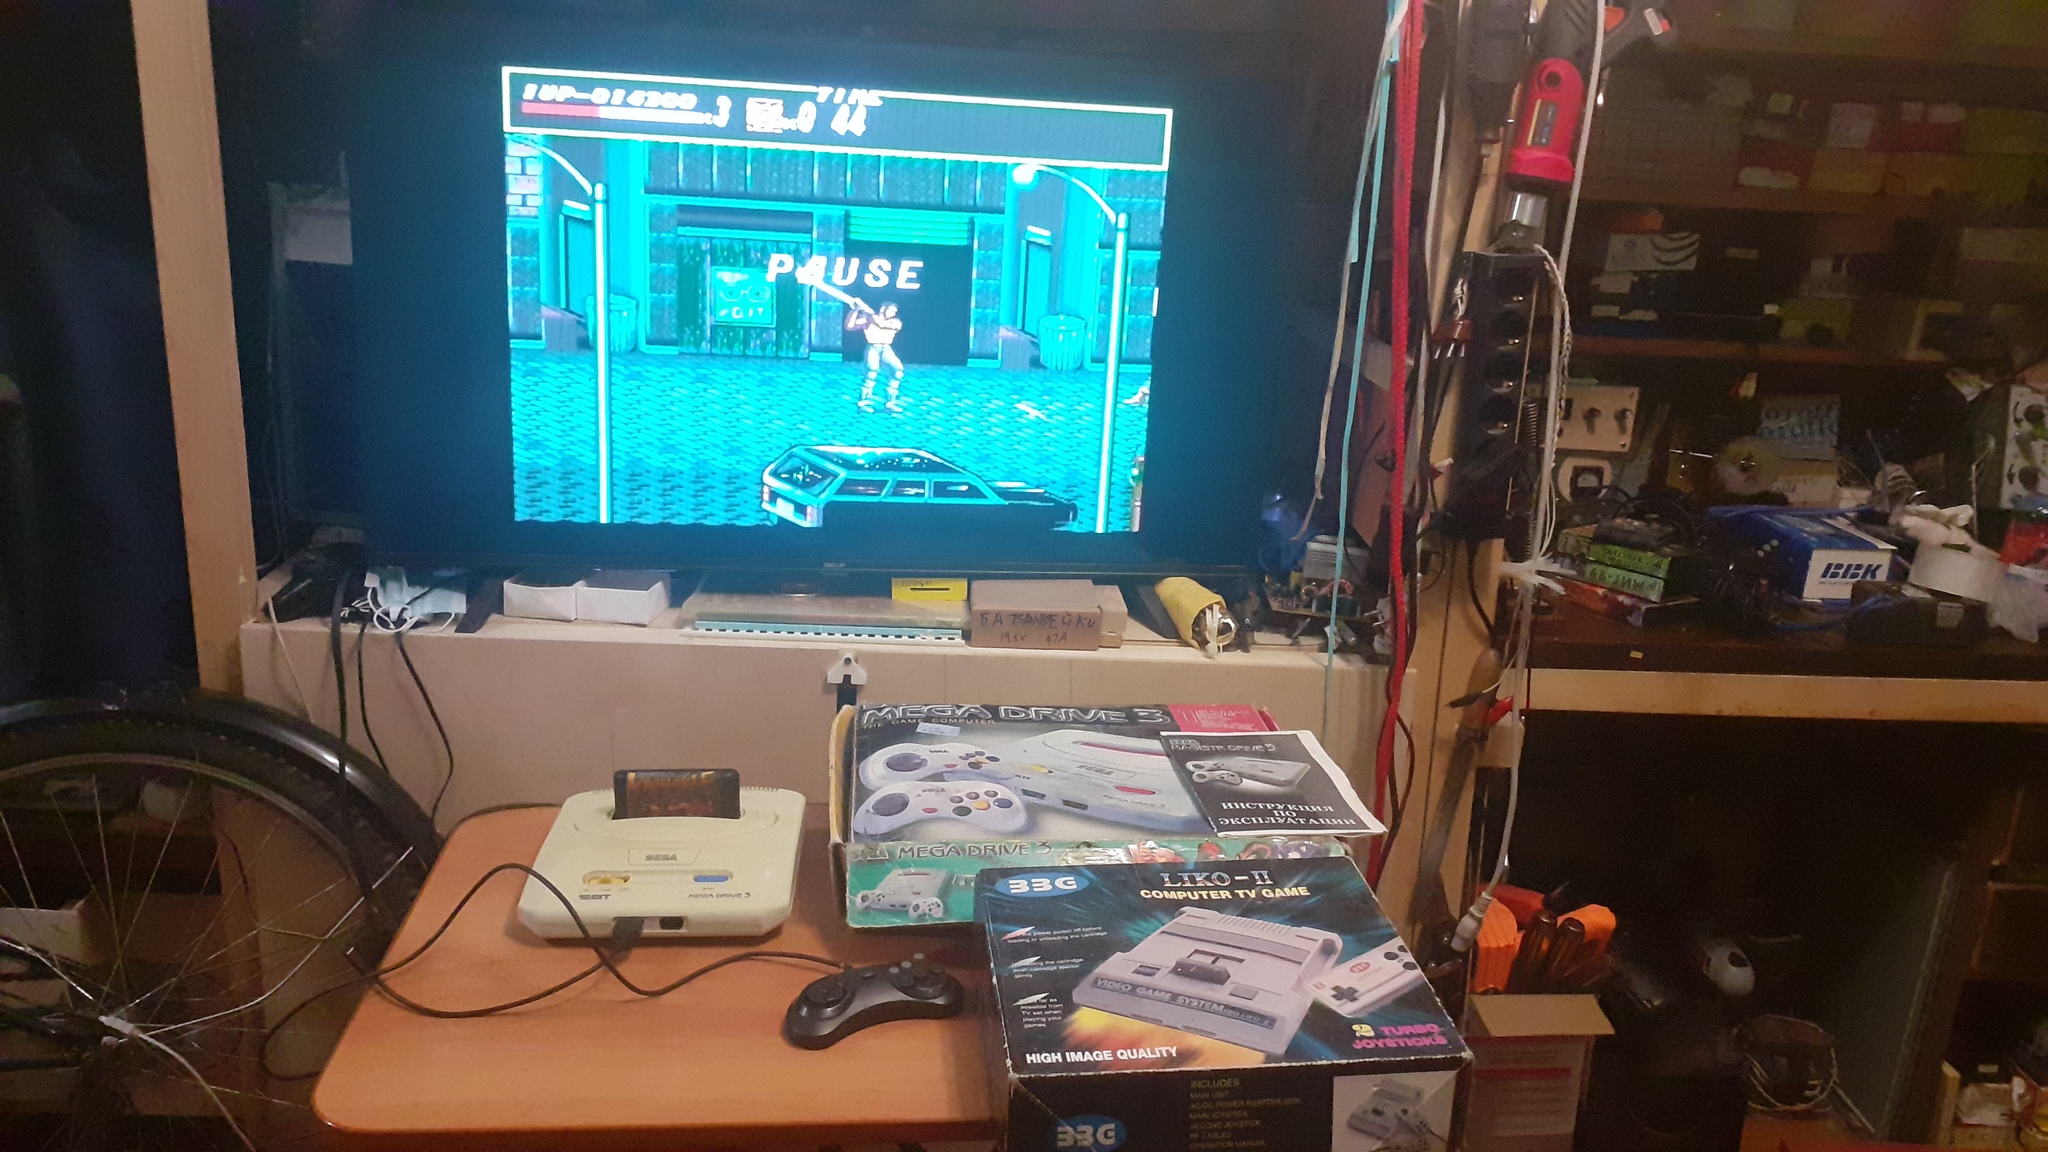 Dendy from childhood - BBG LIKO-II - Longpost, Video, Retro, Battletoads and Double Dragon, Game console, Memories, 90th, Nostalgia, Childhood, Dandy Games, Dendy, Retro Console, Video game, Retro Games, My